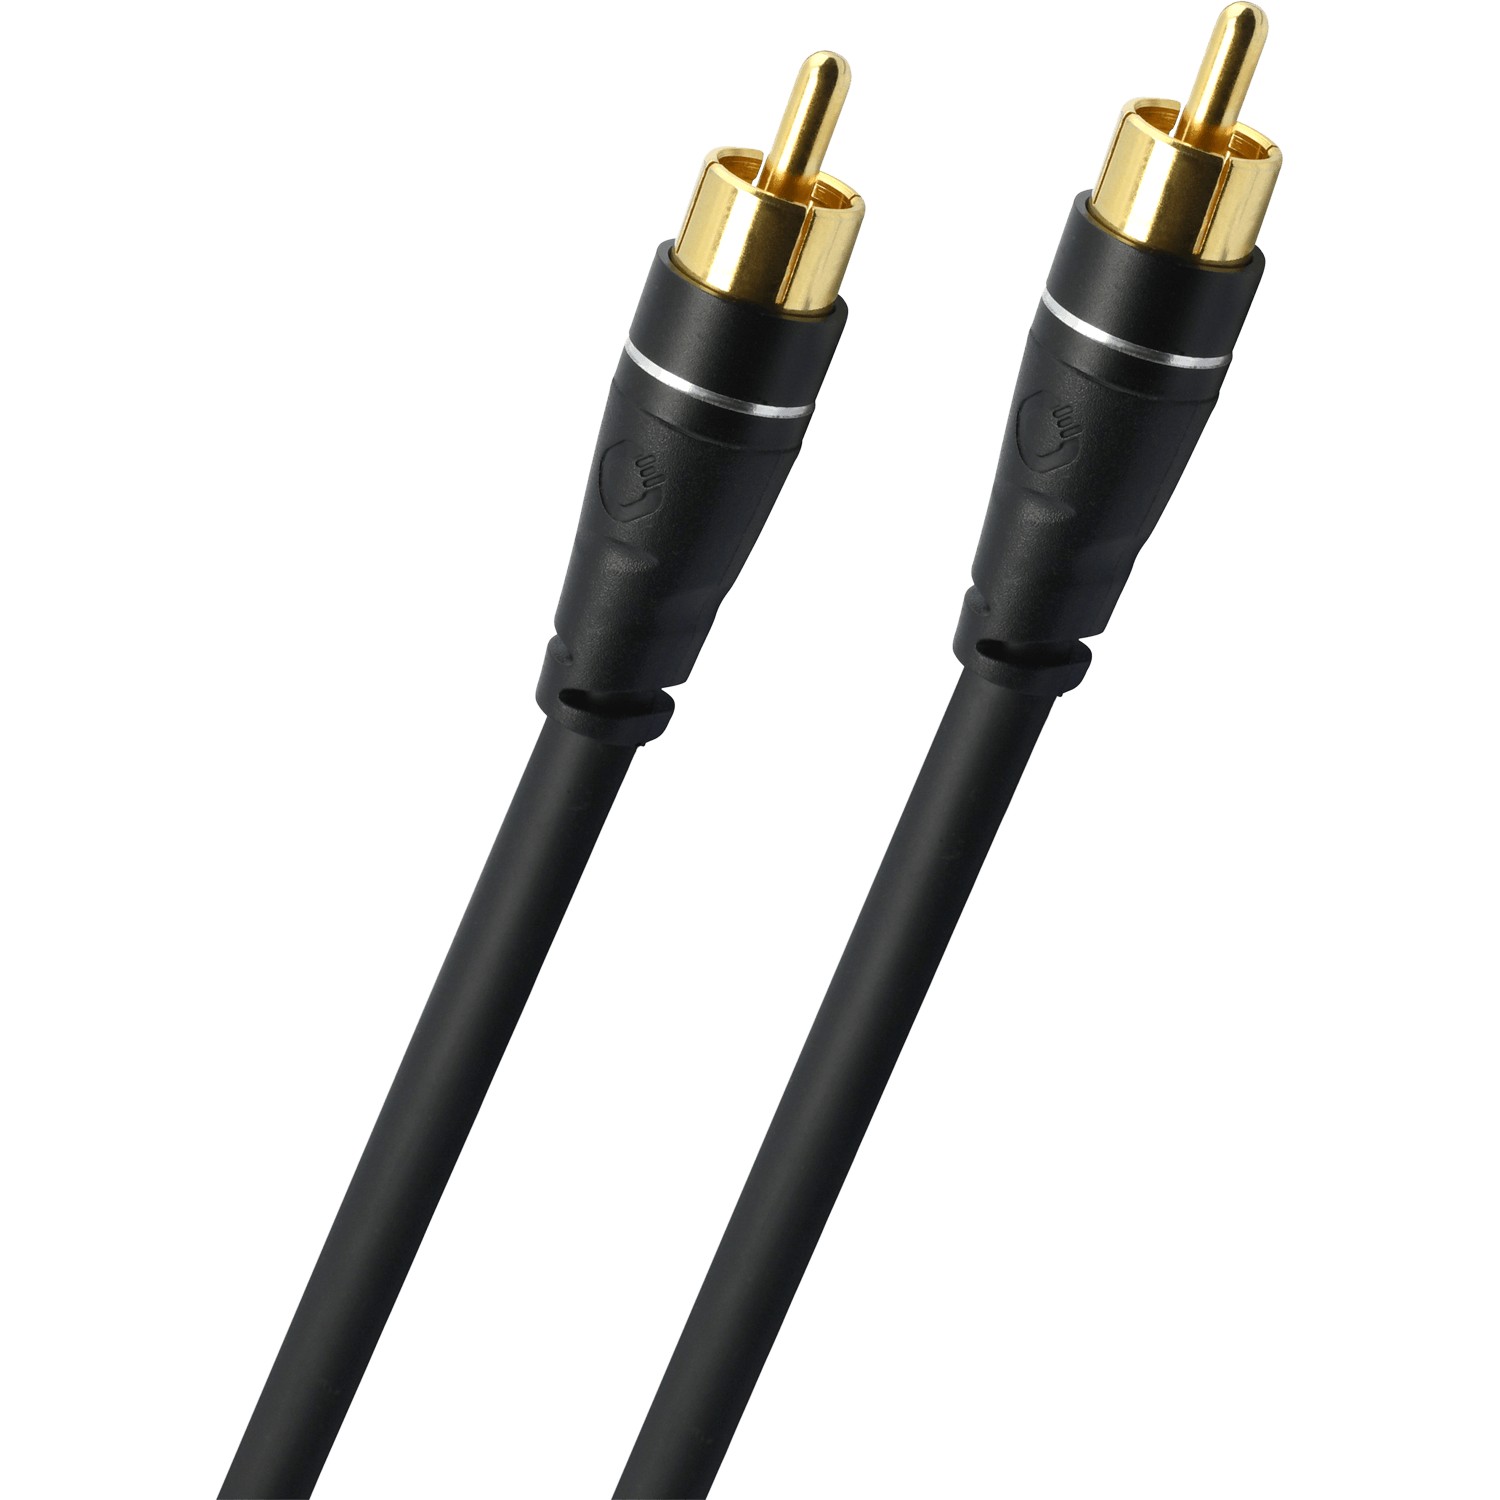 Кабели межблочные аудио Oehlbach EXCELLENCE Sub Link Subwoofer cable 10m bw, D1C33164 кабели межблочные аудио tchernov cable standard coaxial ic rca 5m